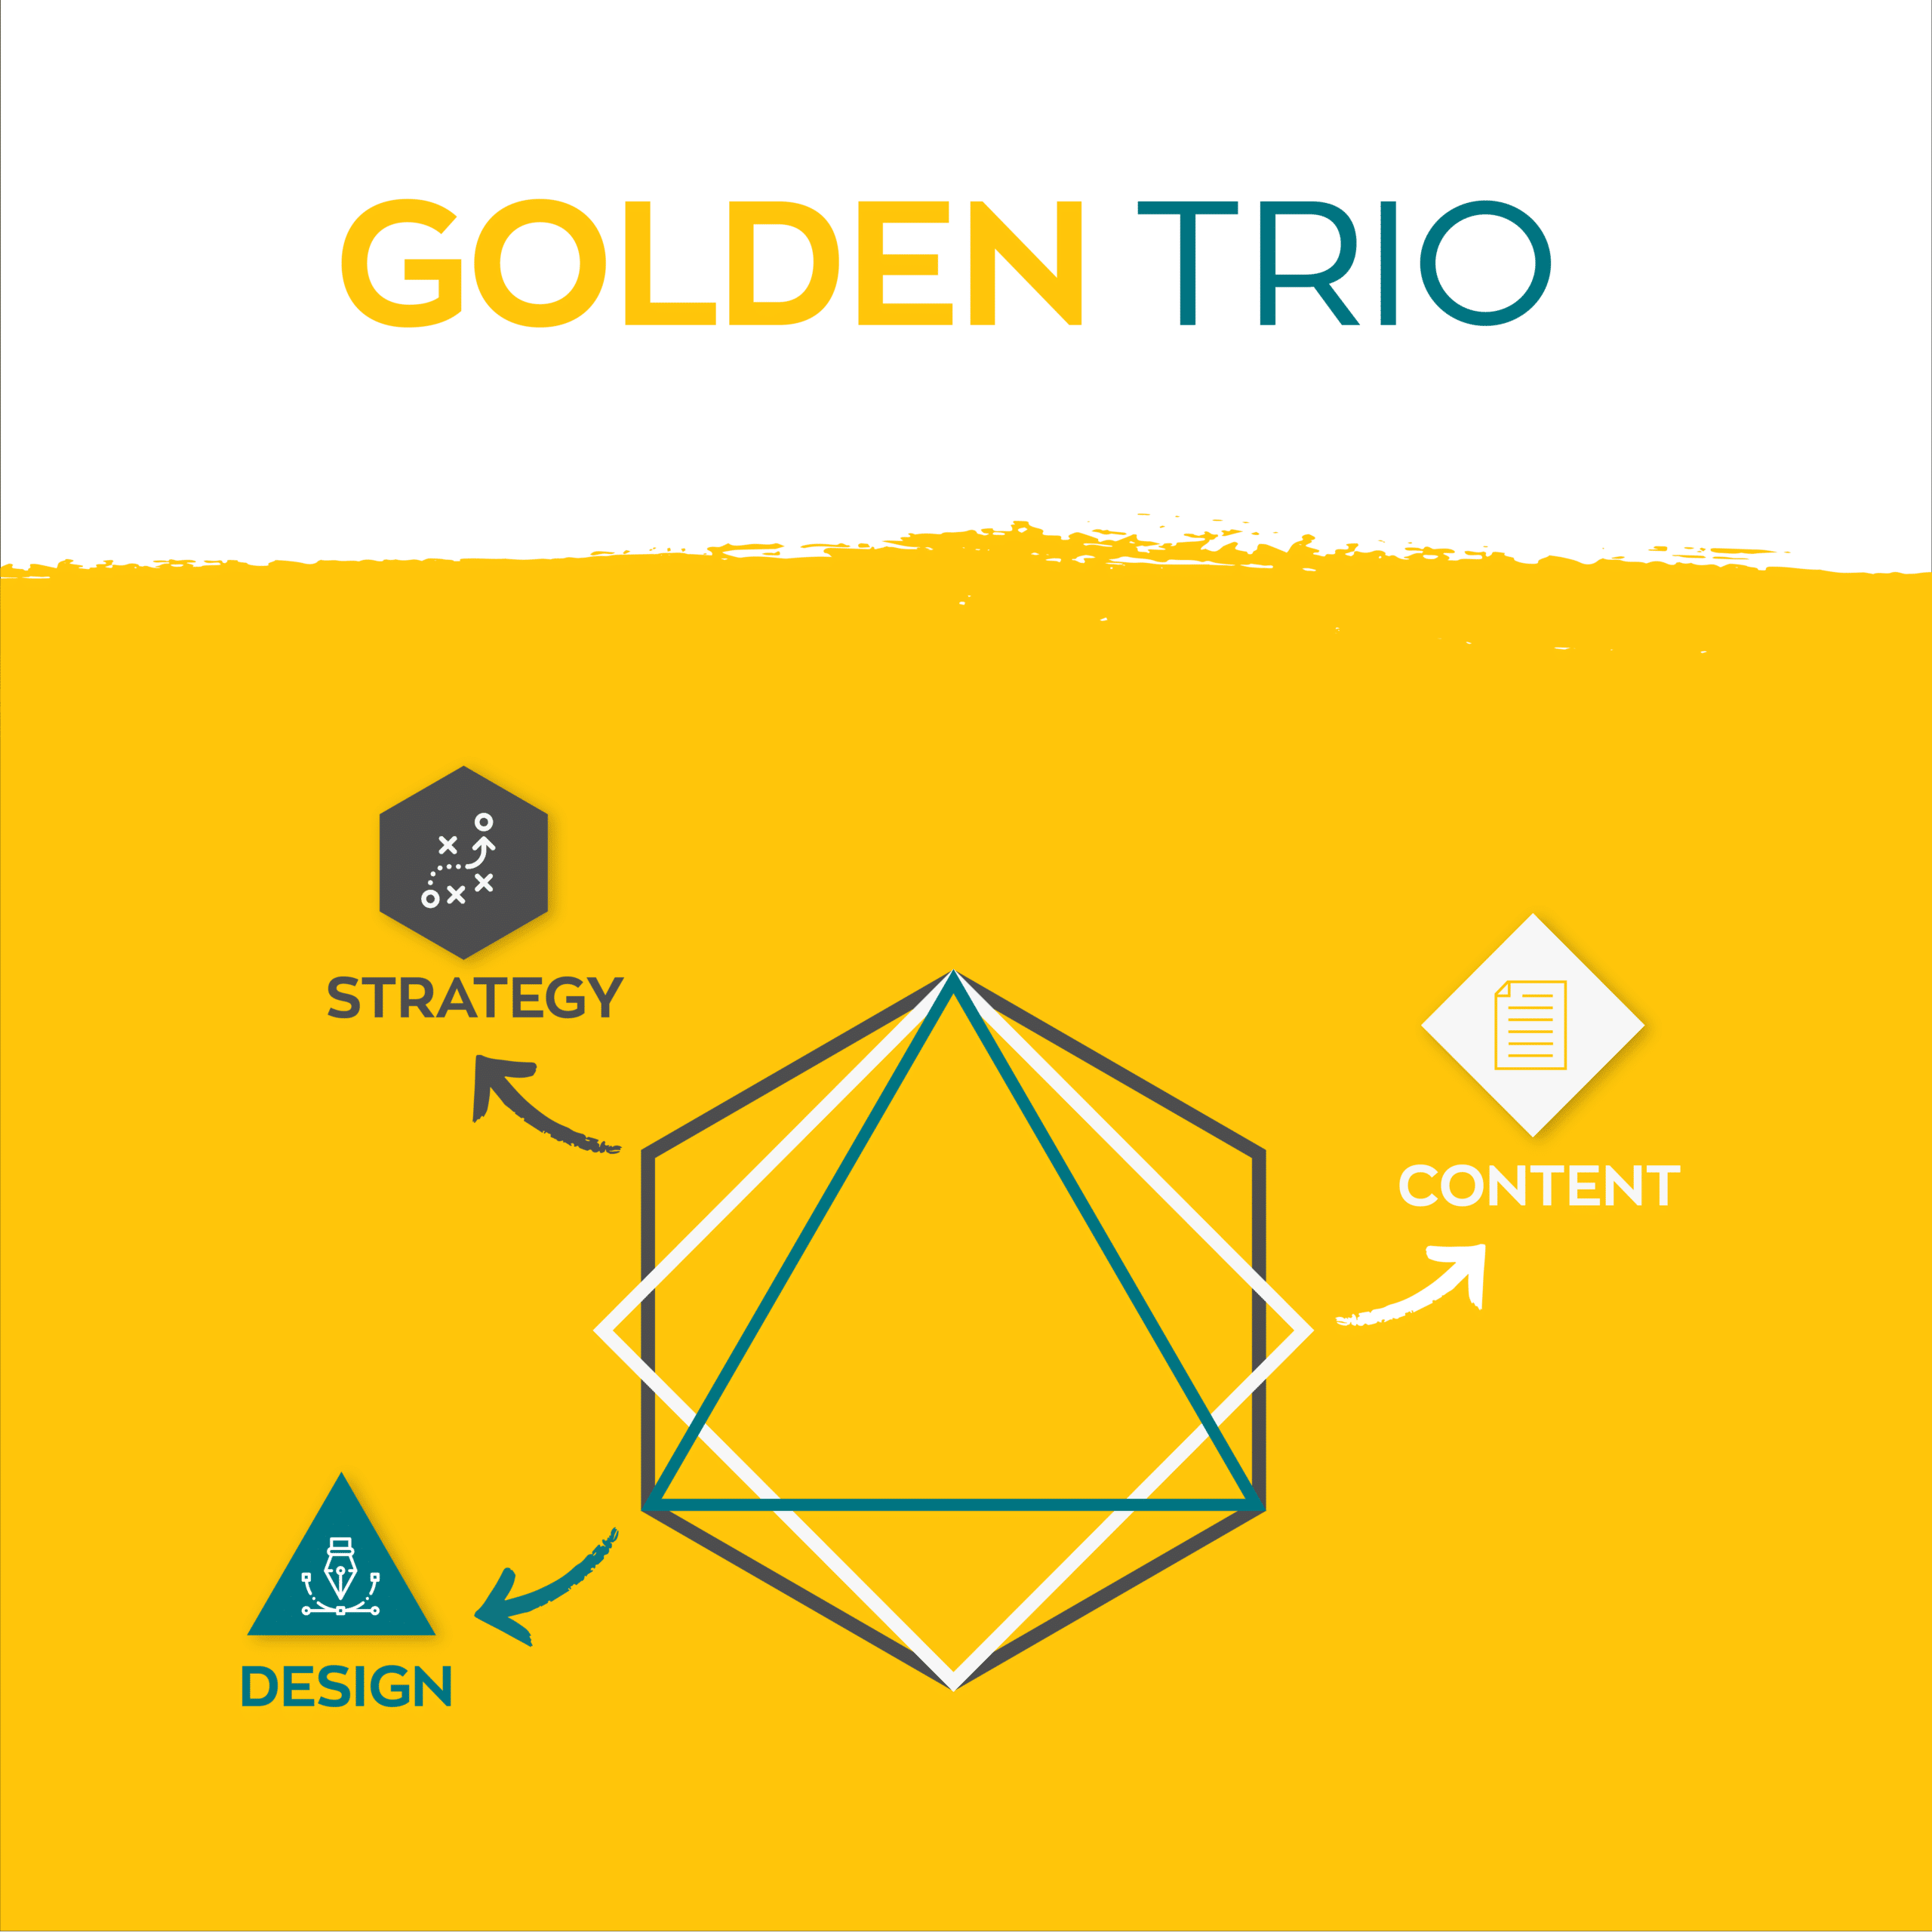 The Golden Trio: strategy, content, and design